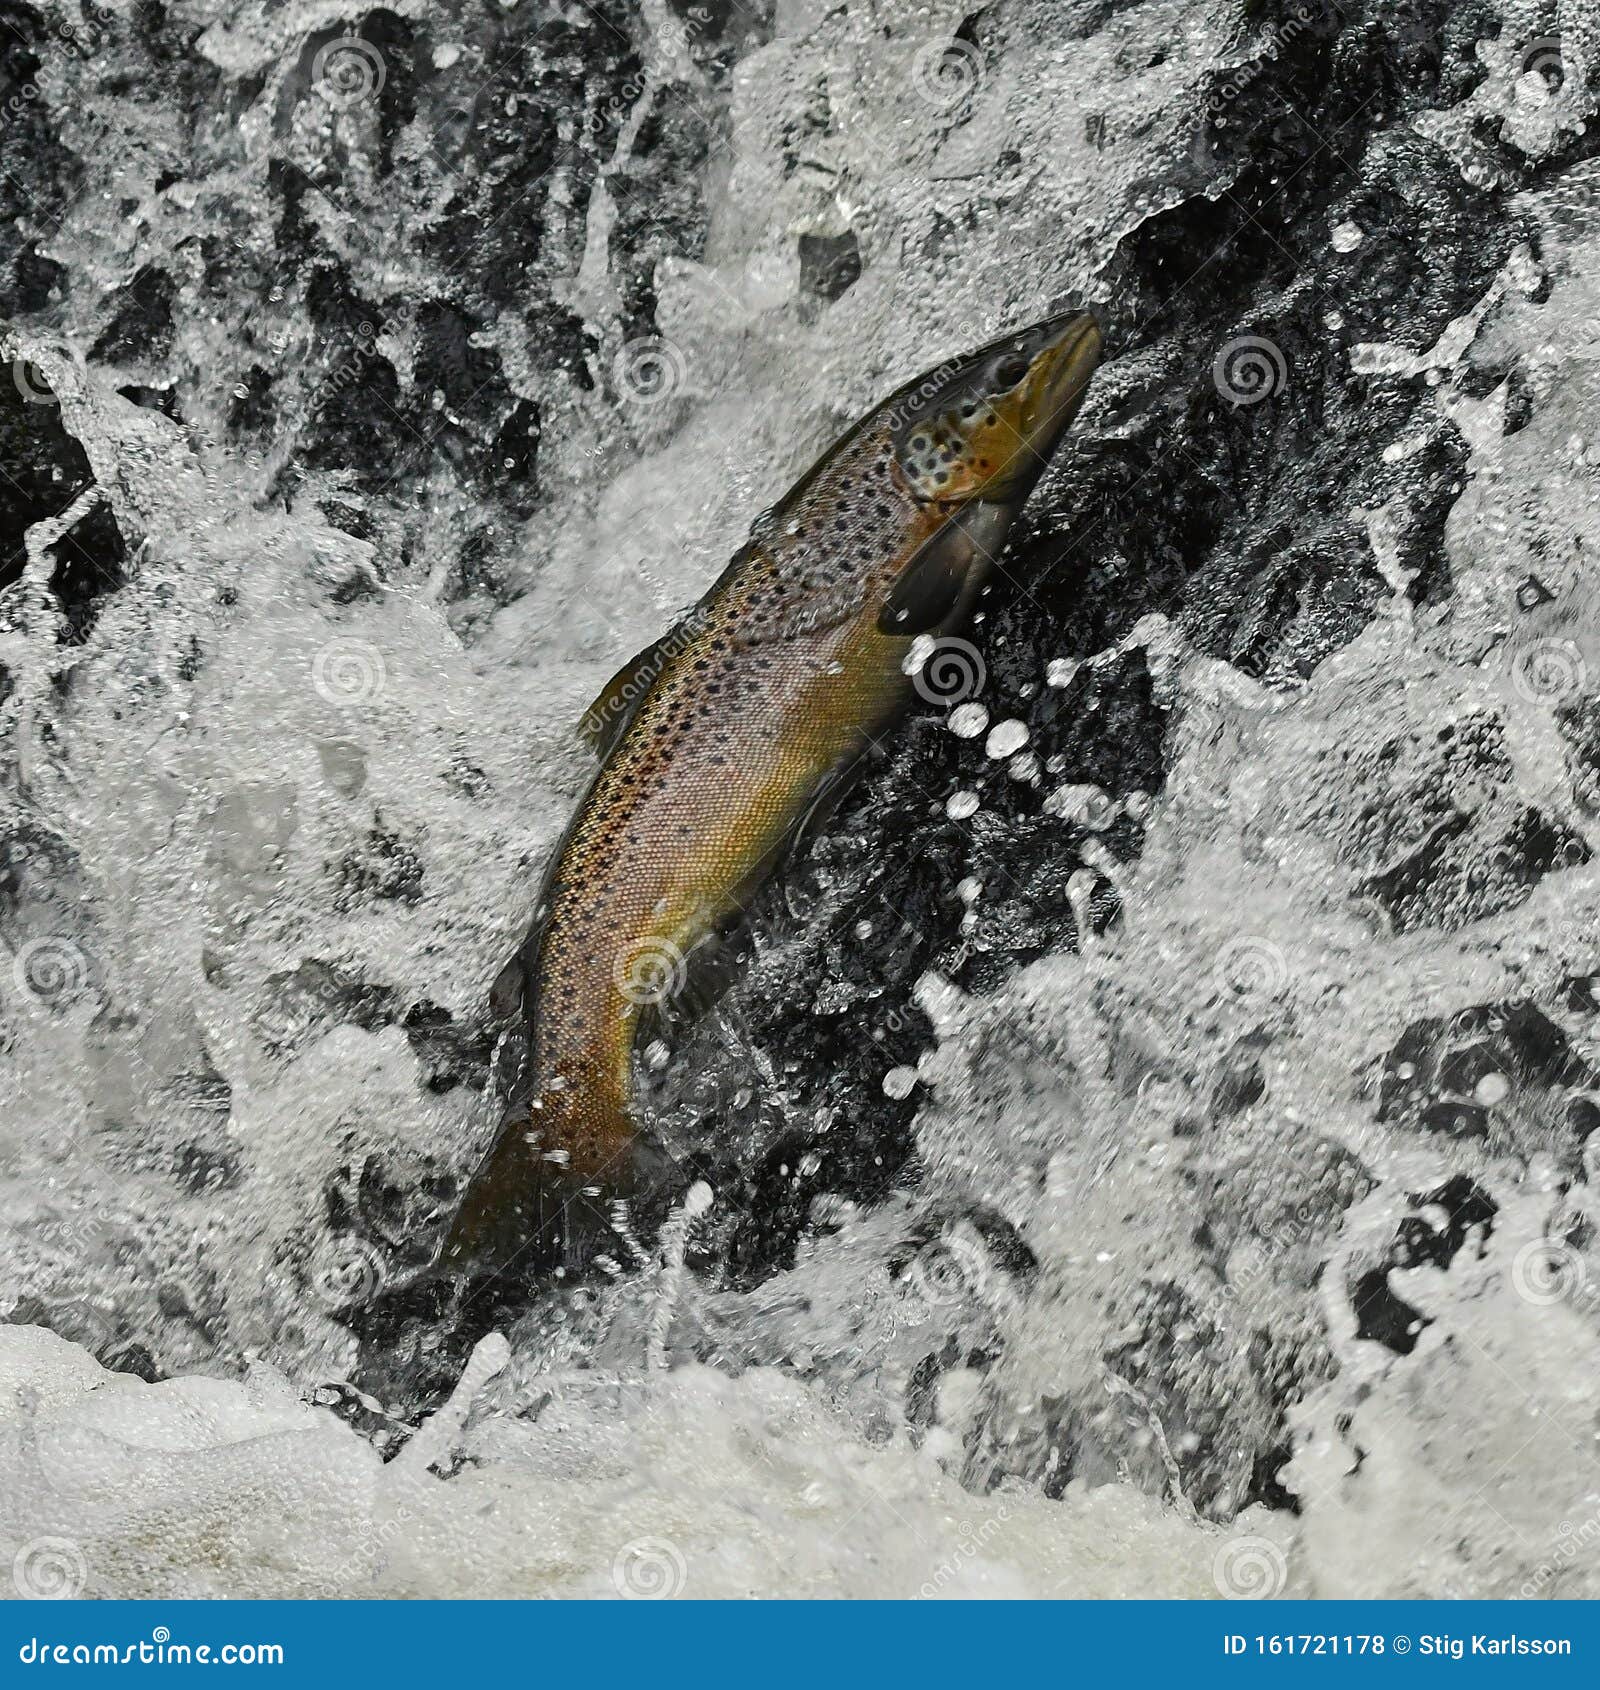 salmon brown trout trying to get upstream in a river